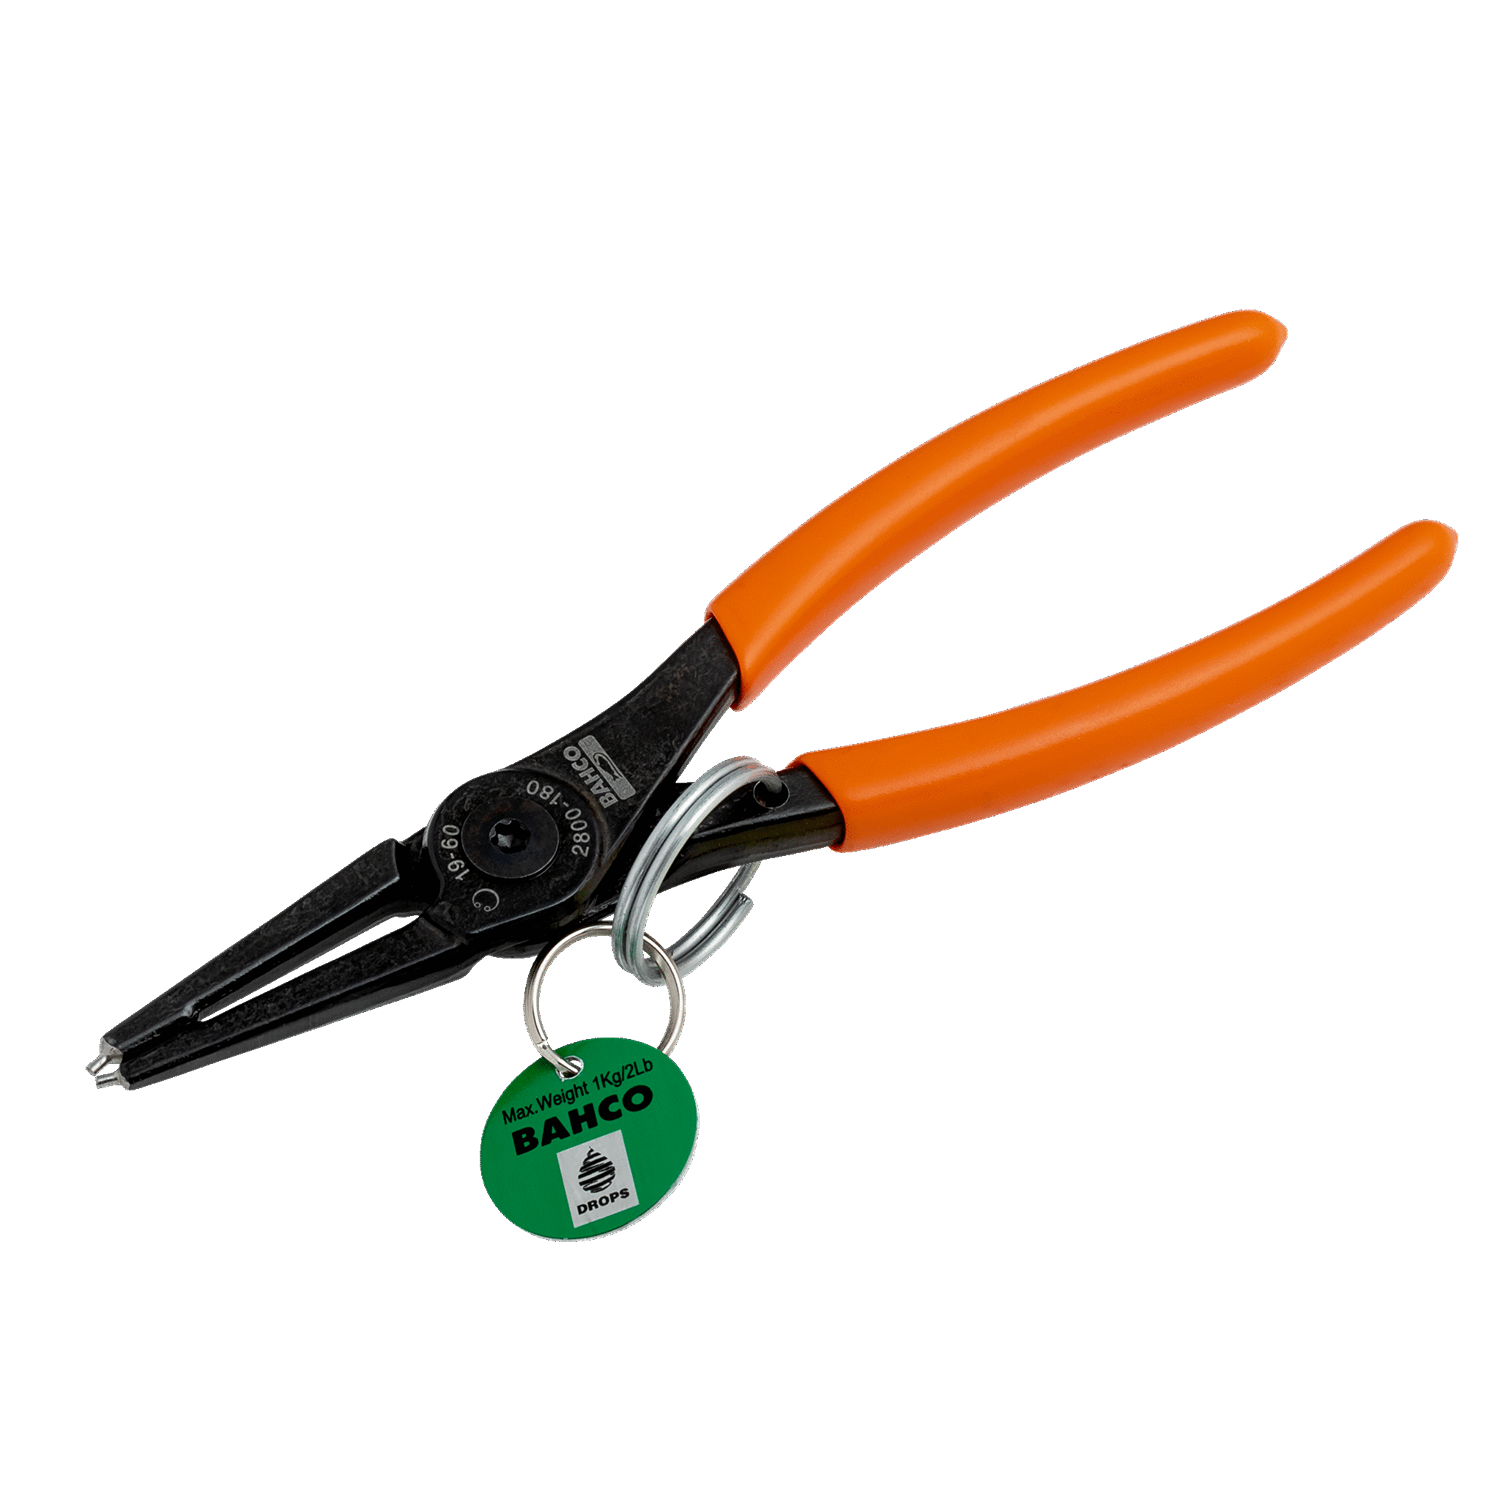 BAHCO TAH2800 Internal Circlip Plier with Straight Jaws - Premium Circlip Plier from BAHCO - Shop now at Yew Aik.